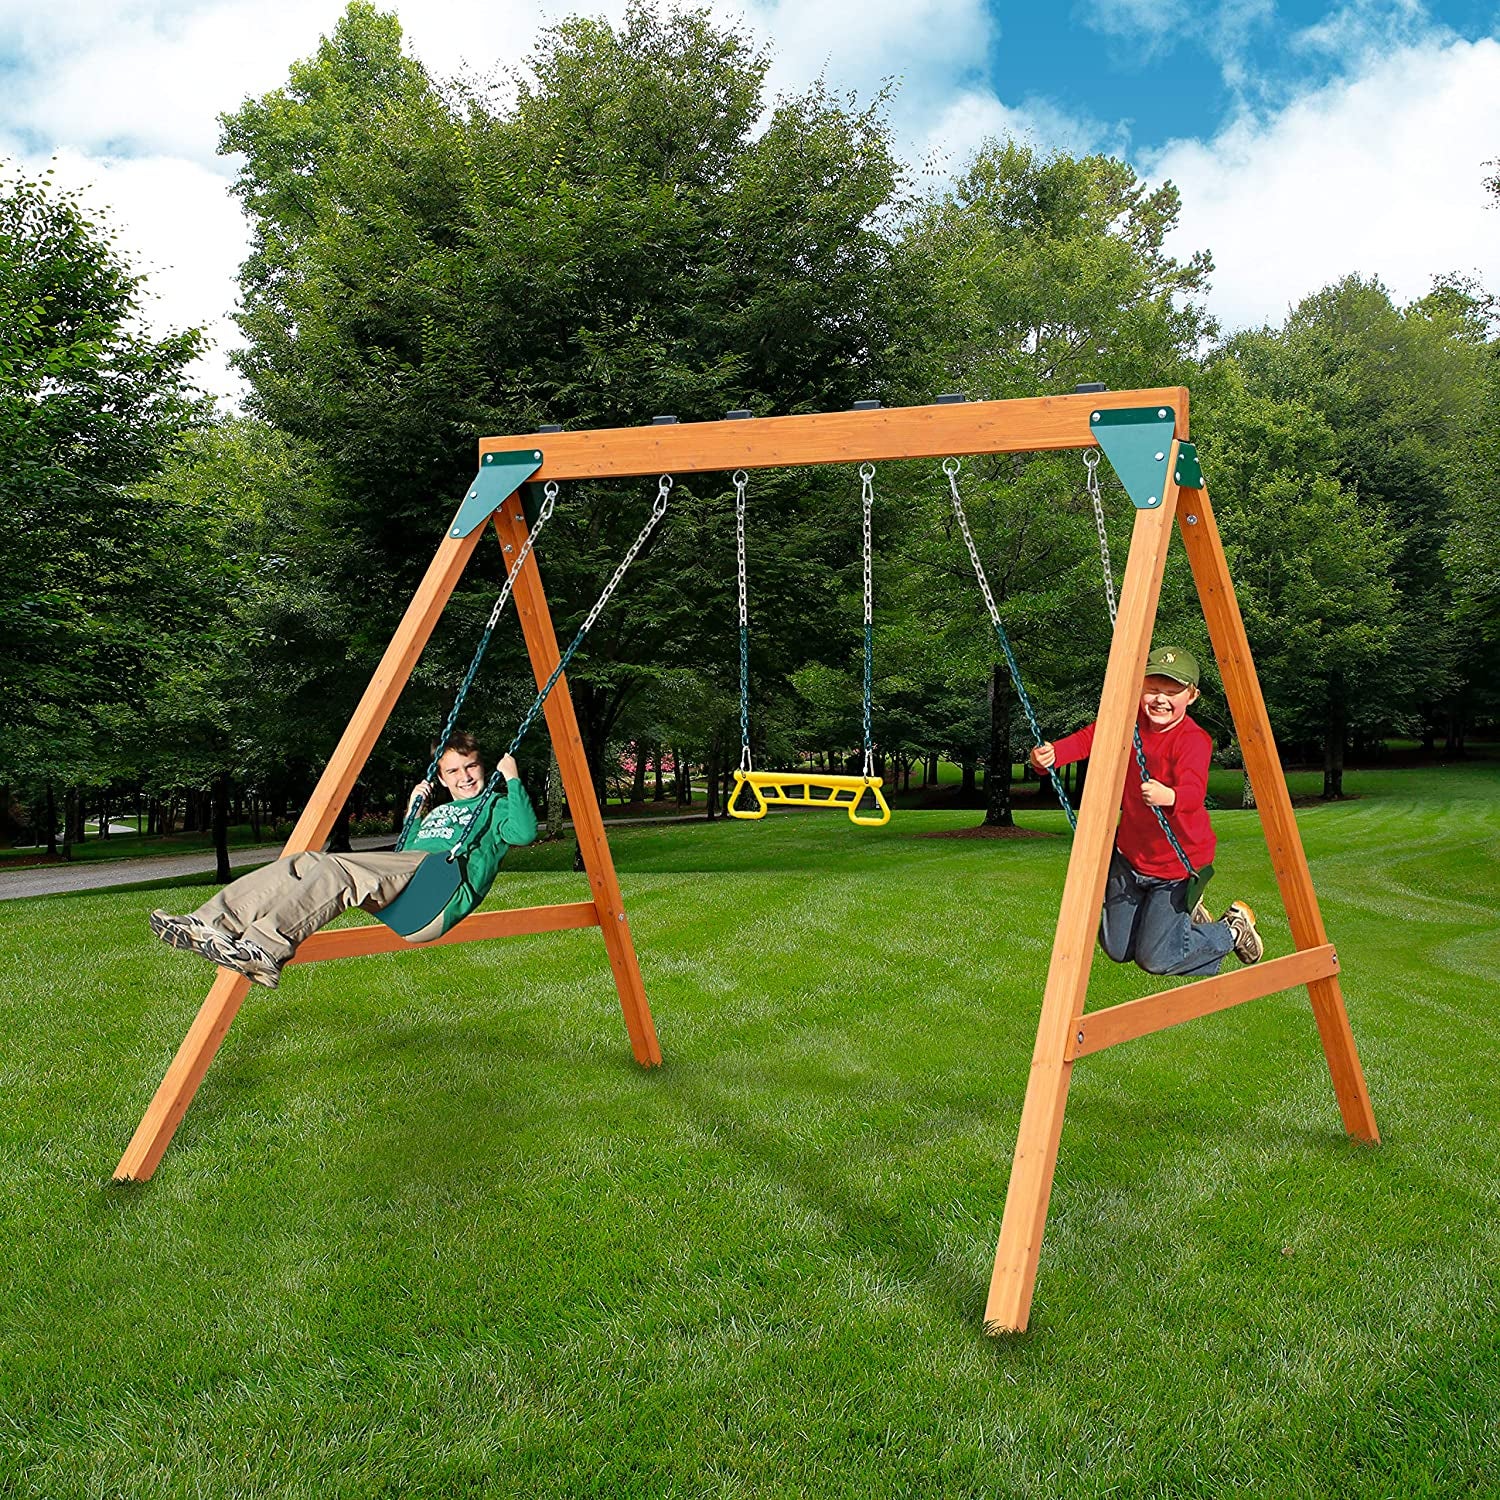 two kids swinging on a wooden swing set with a yellow acrobat bar in the middle